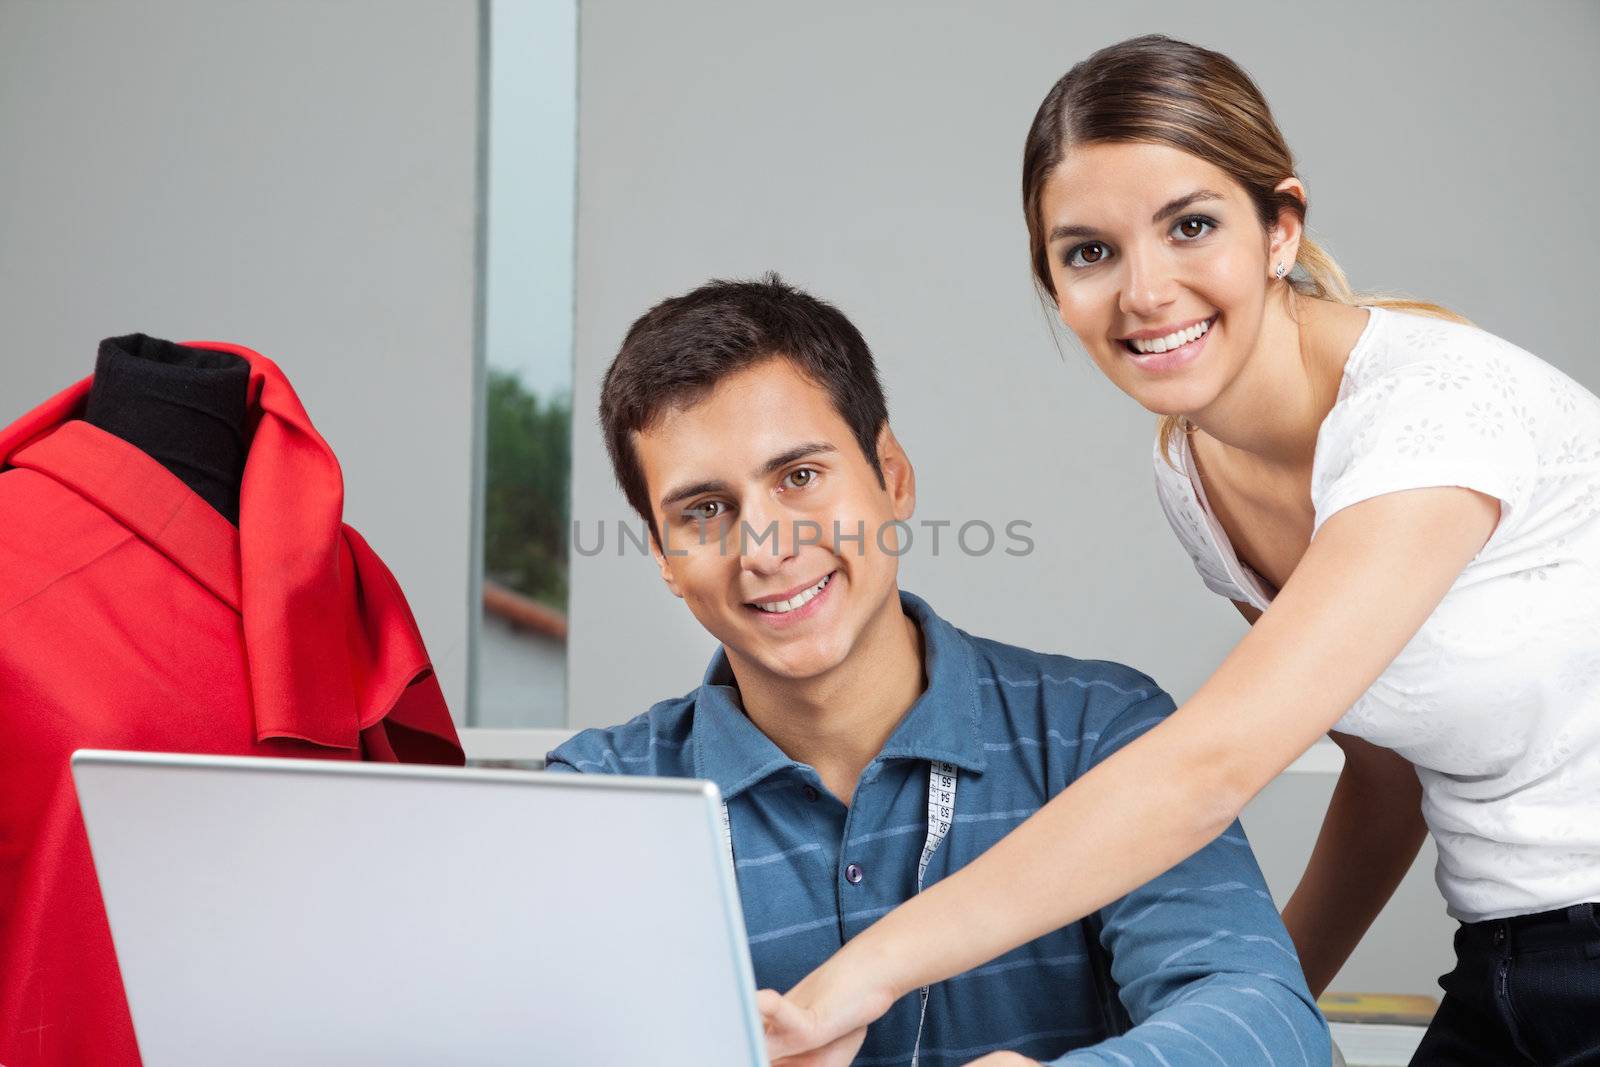 Portrait of young fashion designers working together on laptop